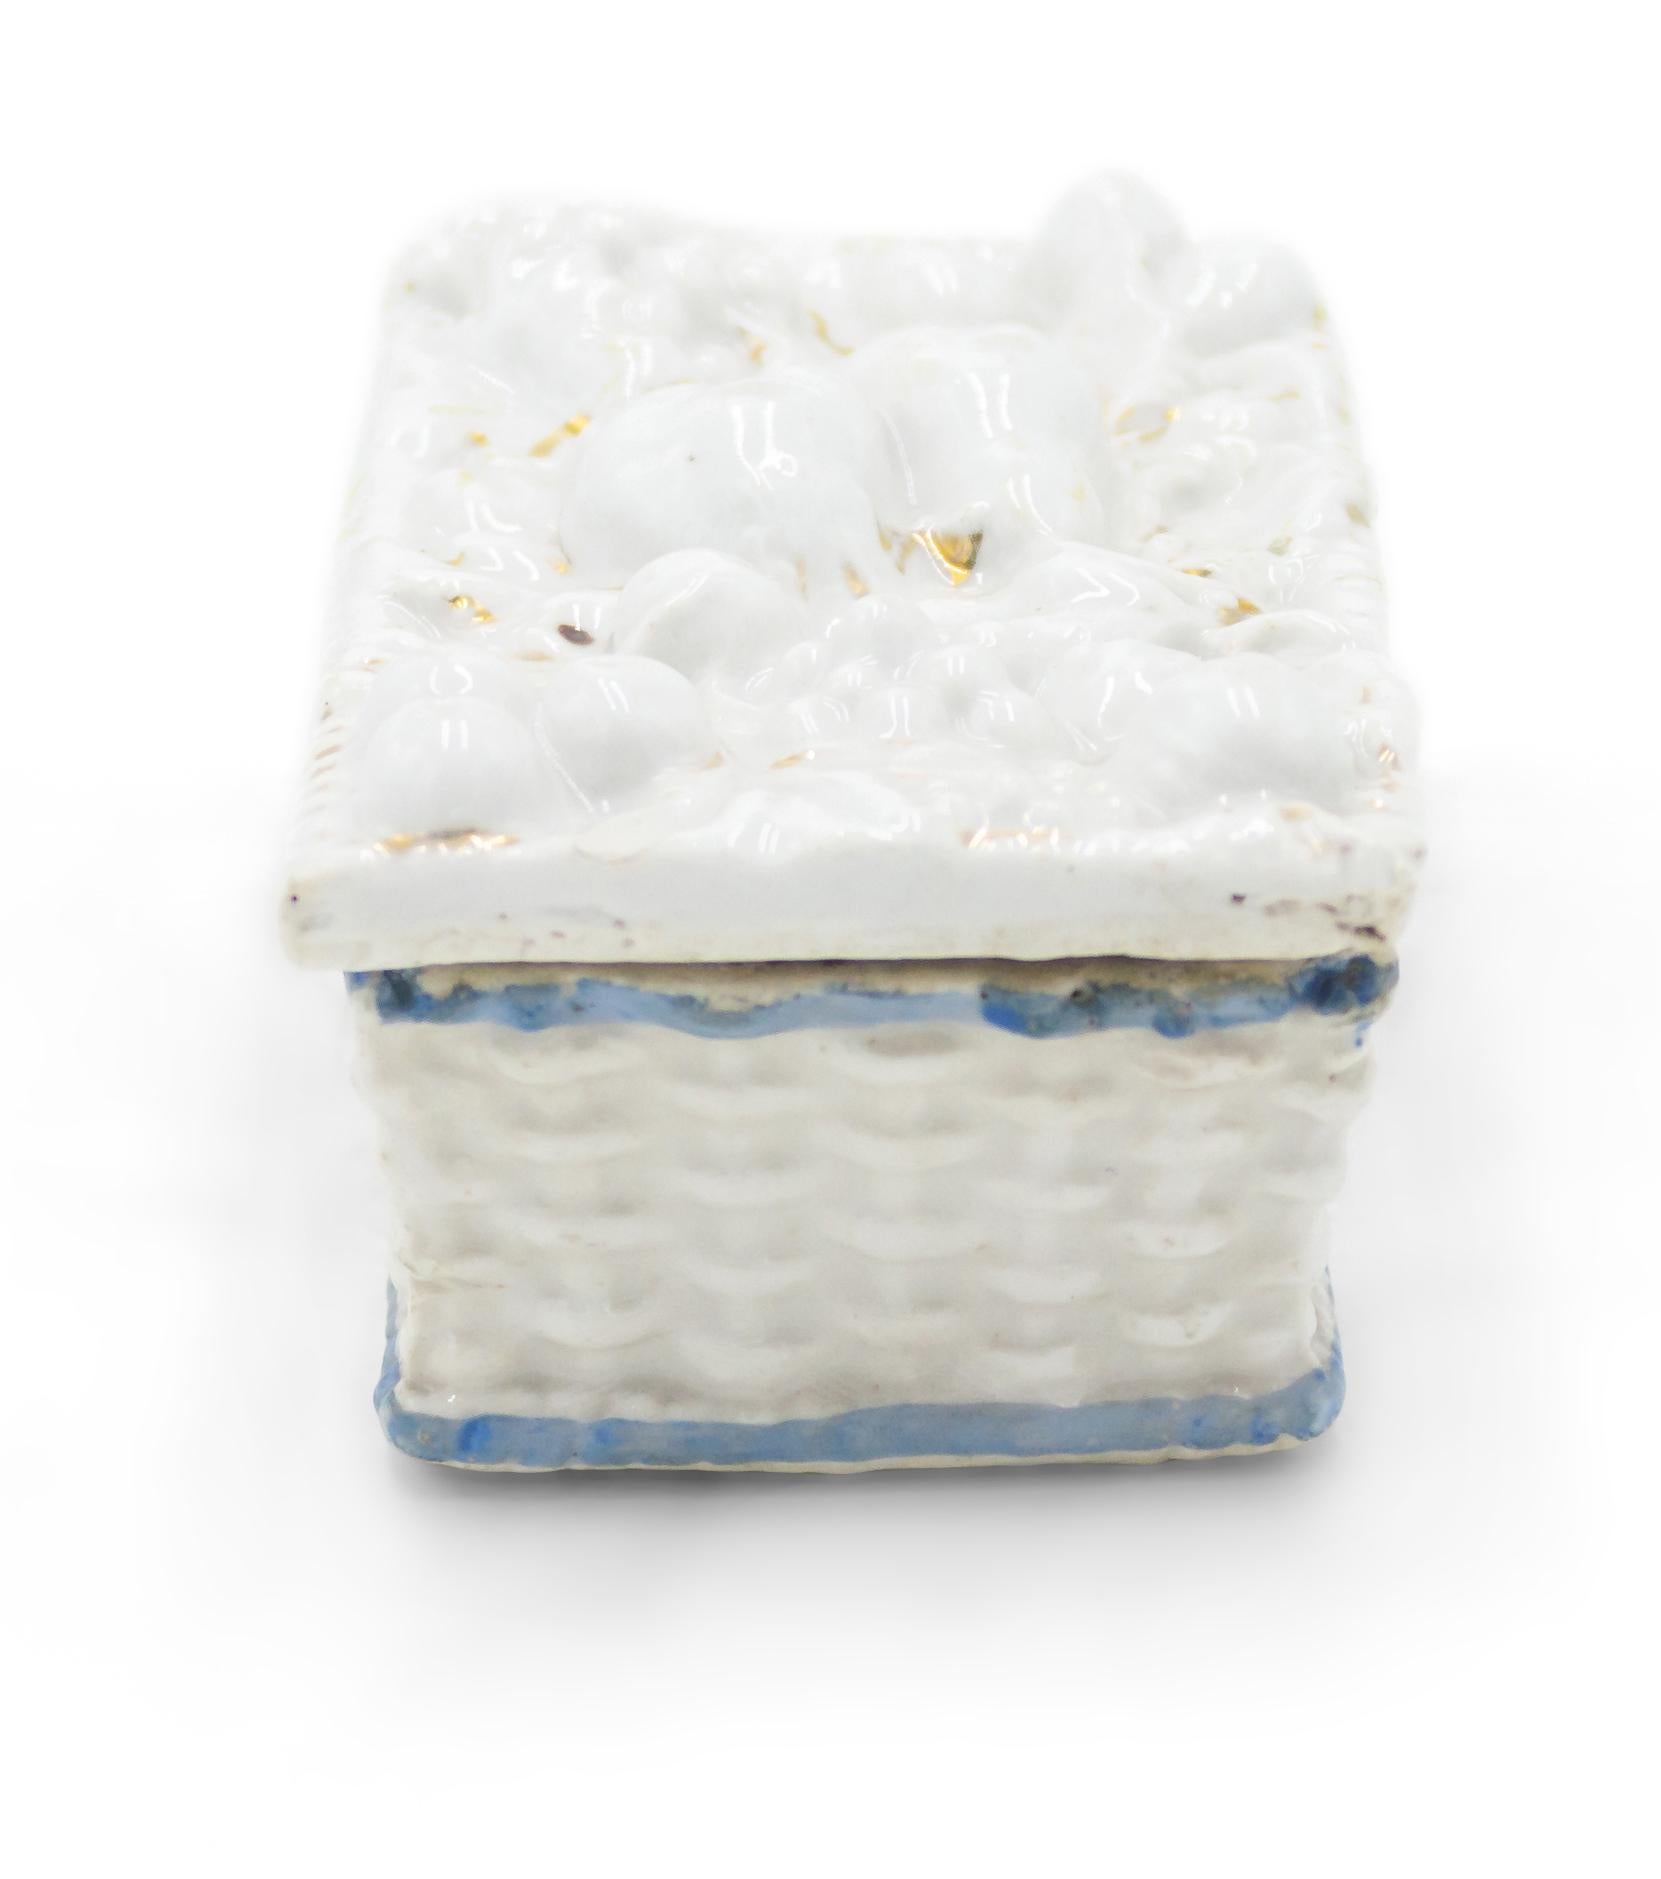 Woven English Victorian White Porcelain Box For Sale